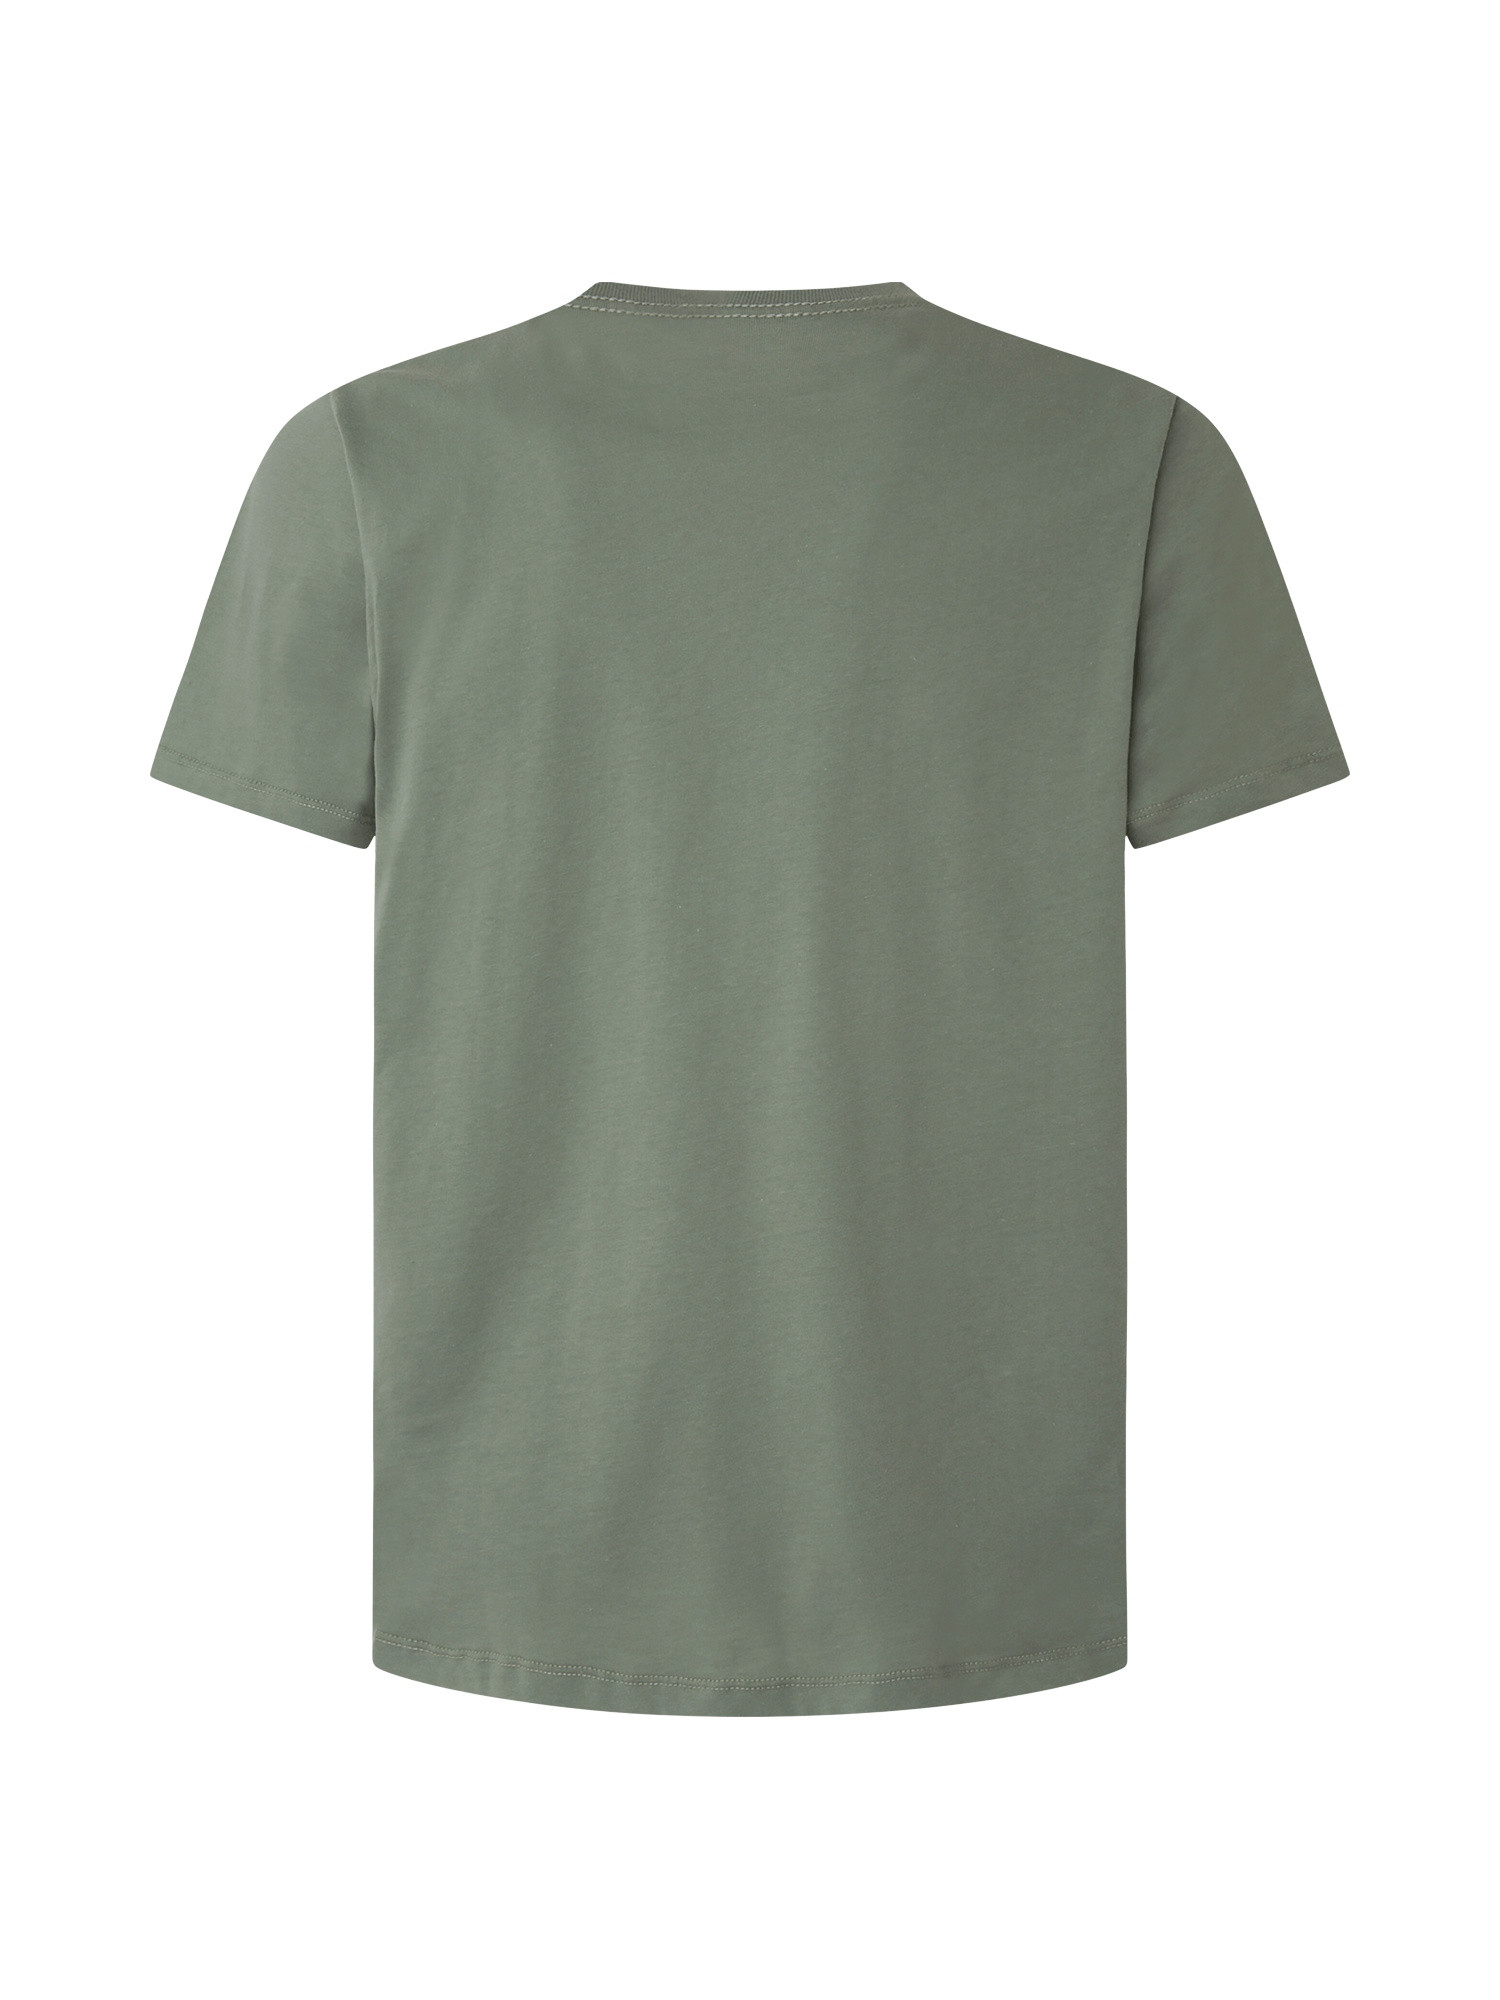 Pepe Jeans - T-shirt con logo in cotone, Verde chiaro, large image number 1